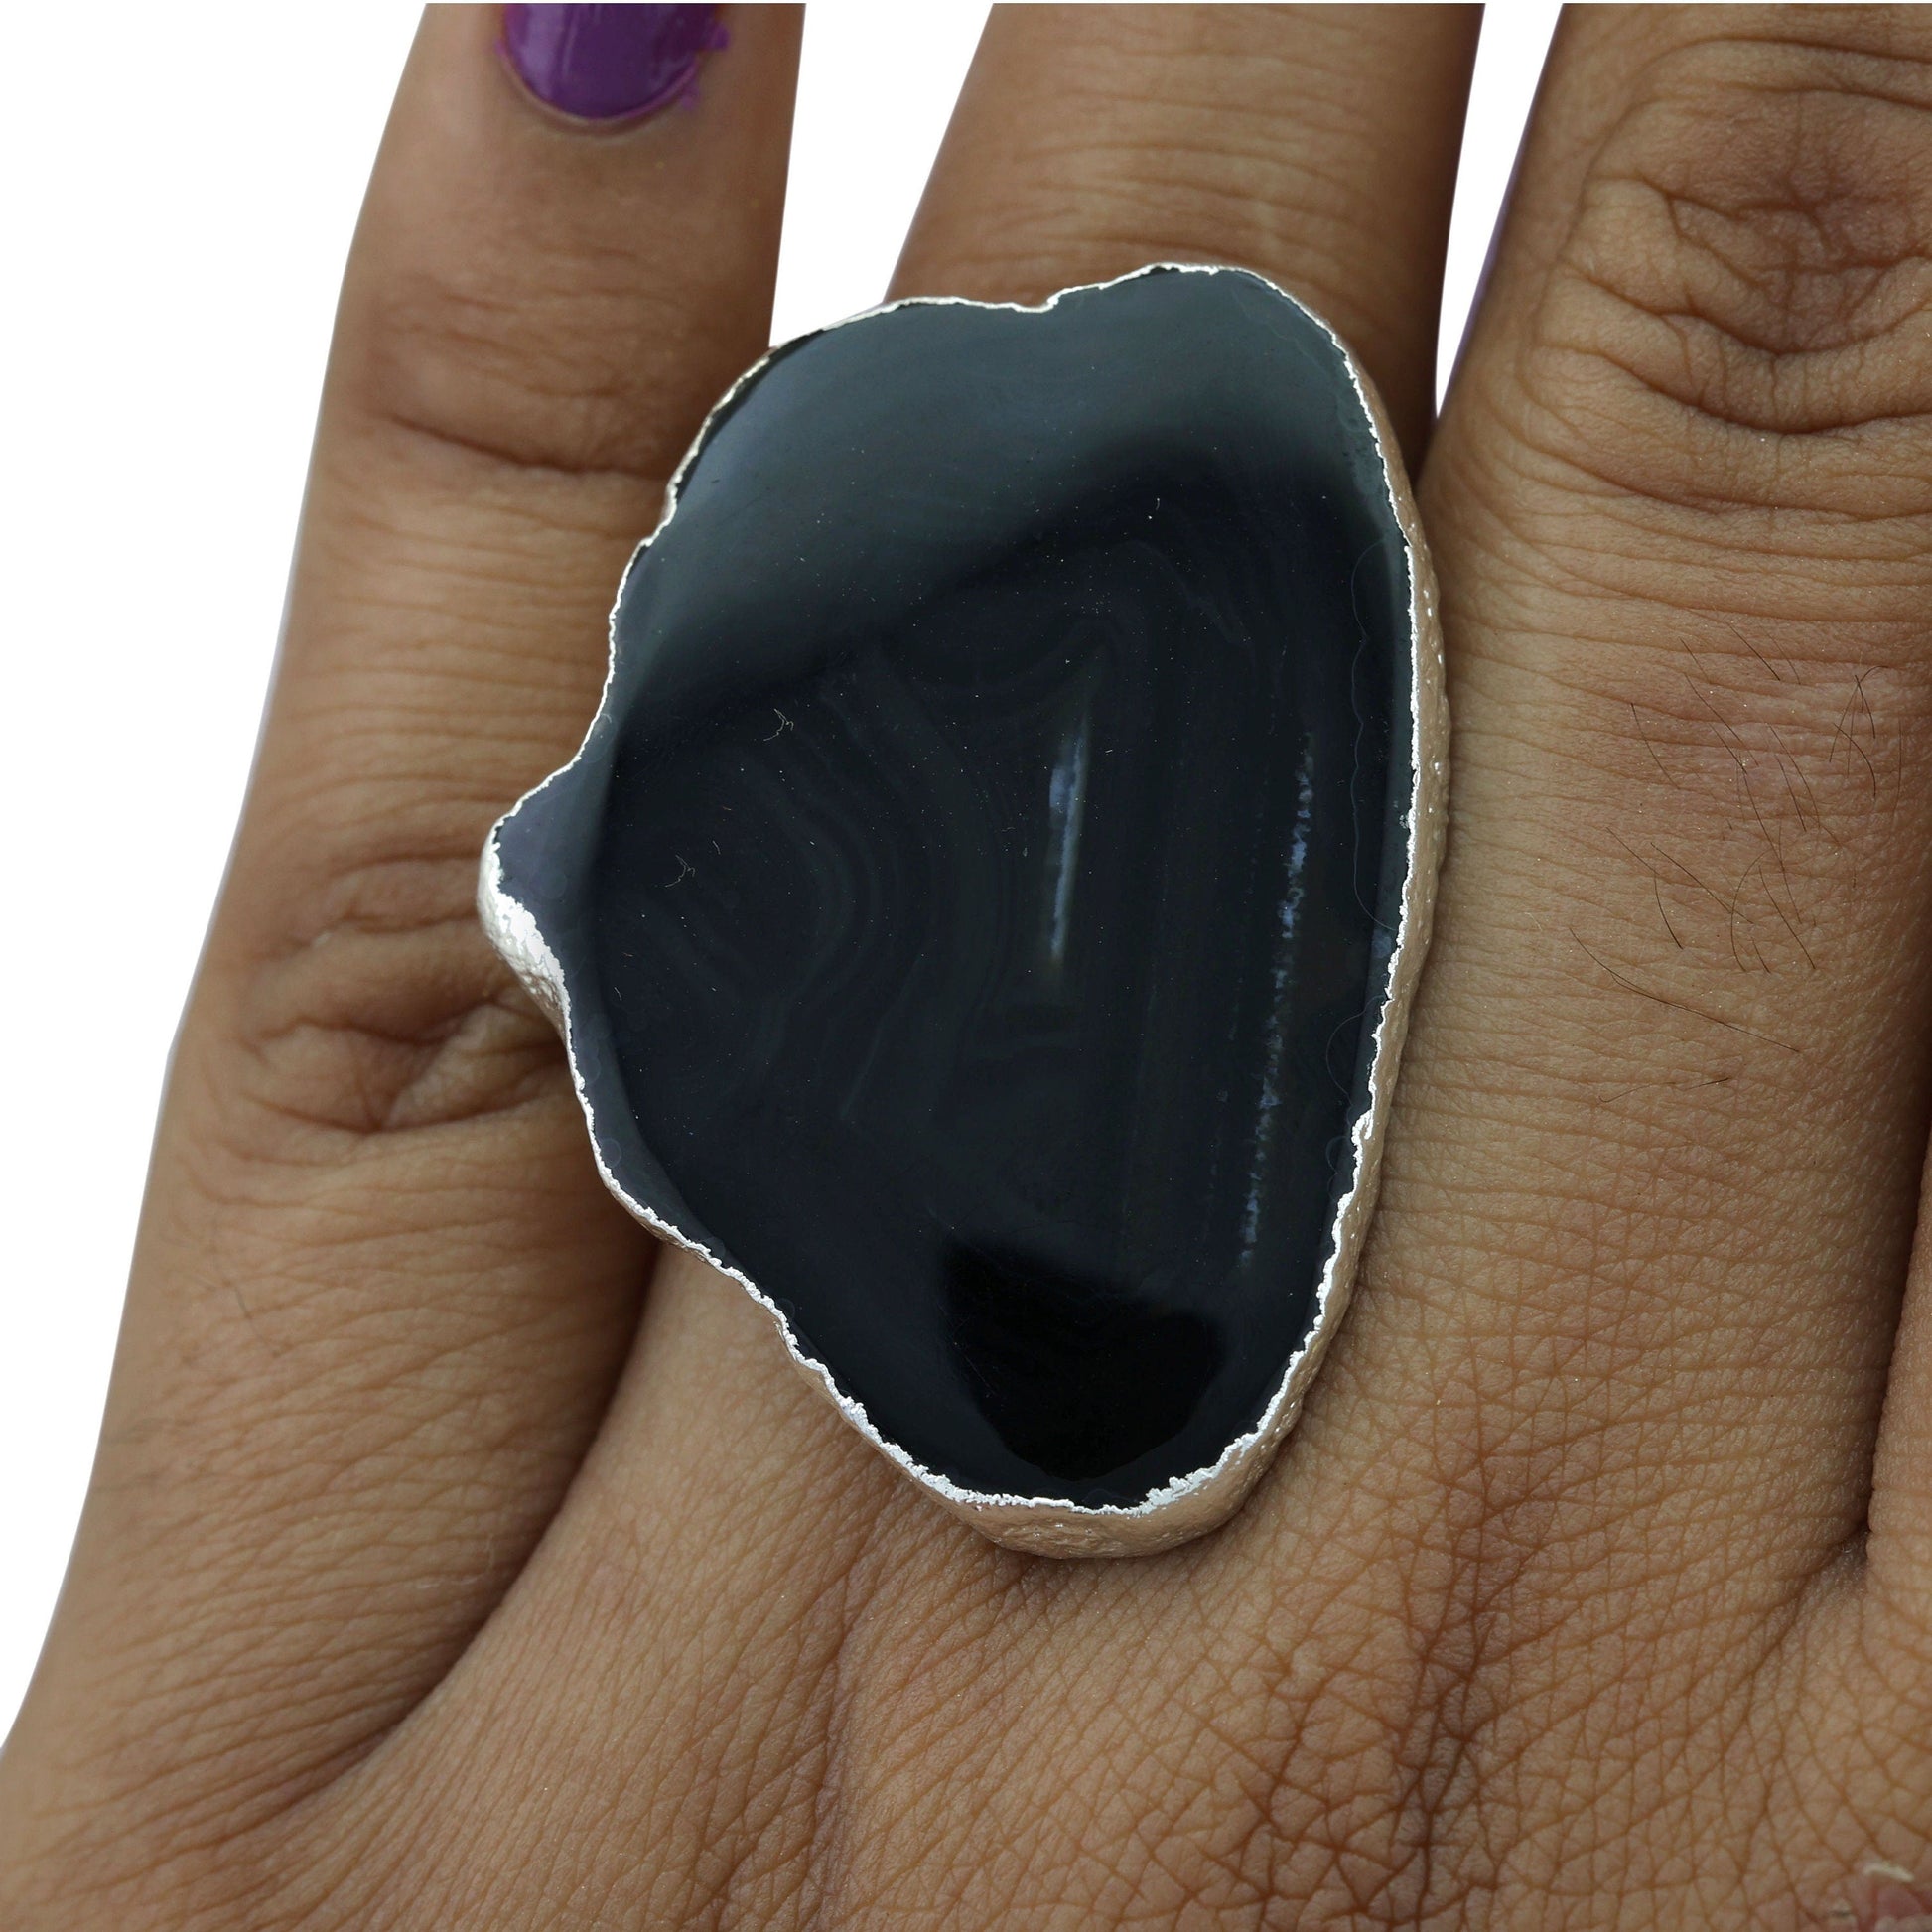 30 - 40 mm Agate Geode Slice Ring Silver Adjustable ( You get the exact piece as in photo ) - Meena Design